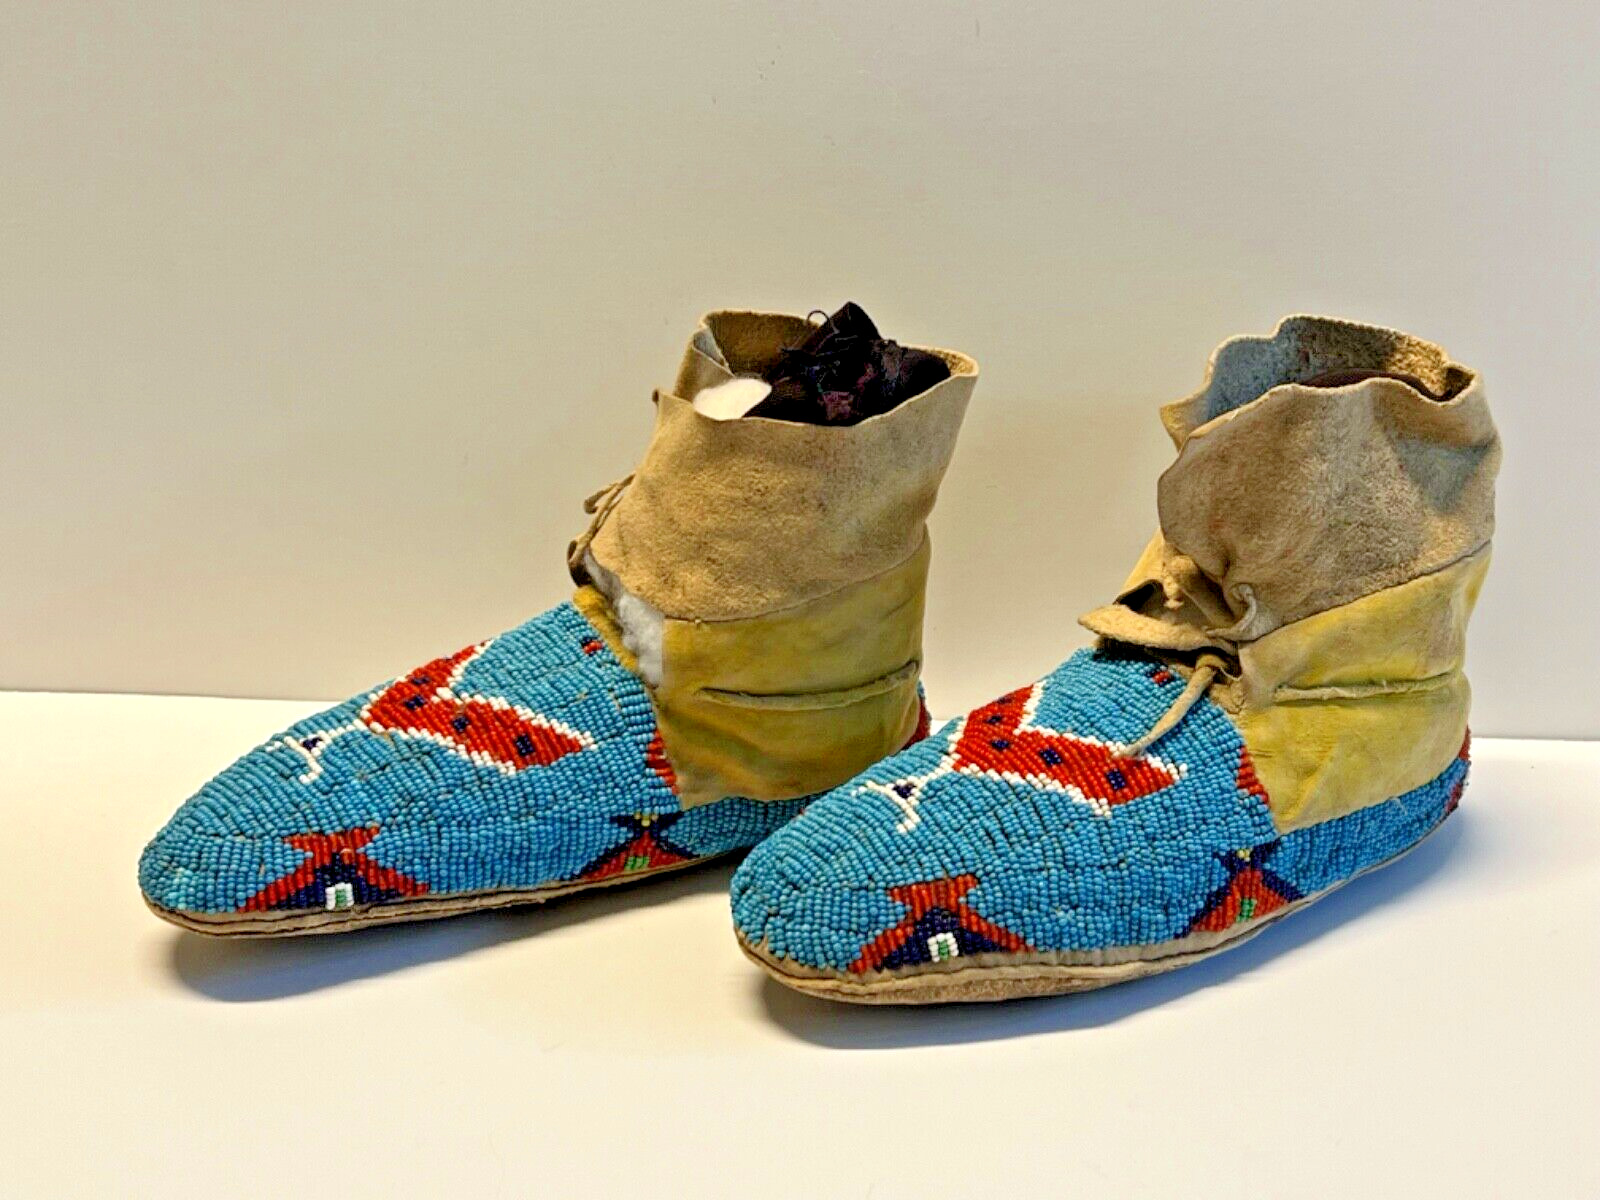 Vintage Native American Indian Moccasins; From Montana; Beaded; 1900 to 1930s